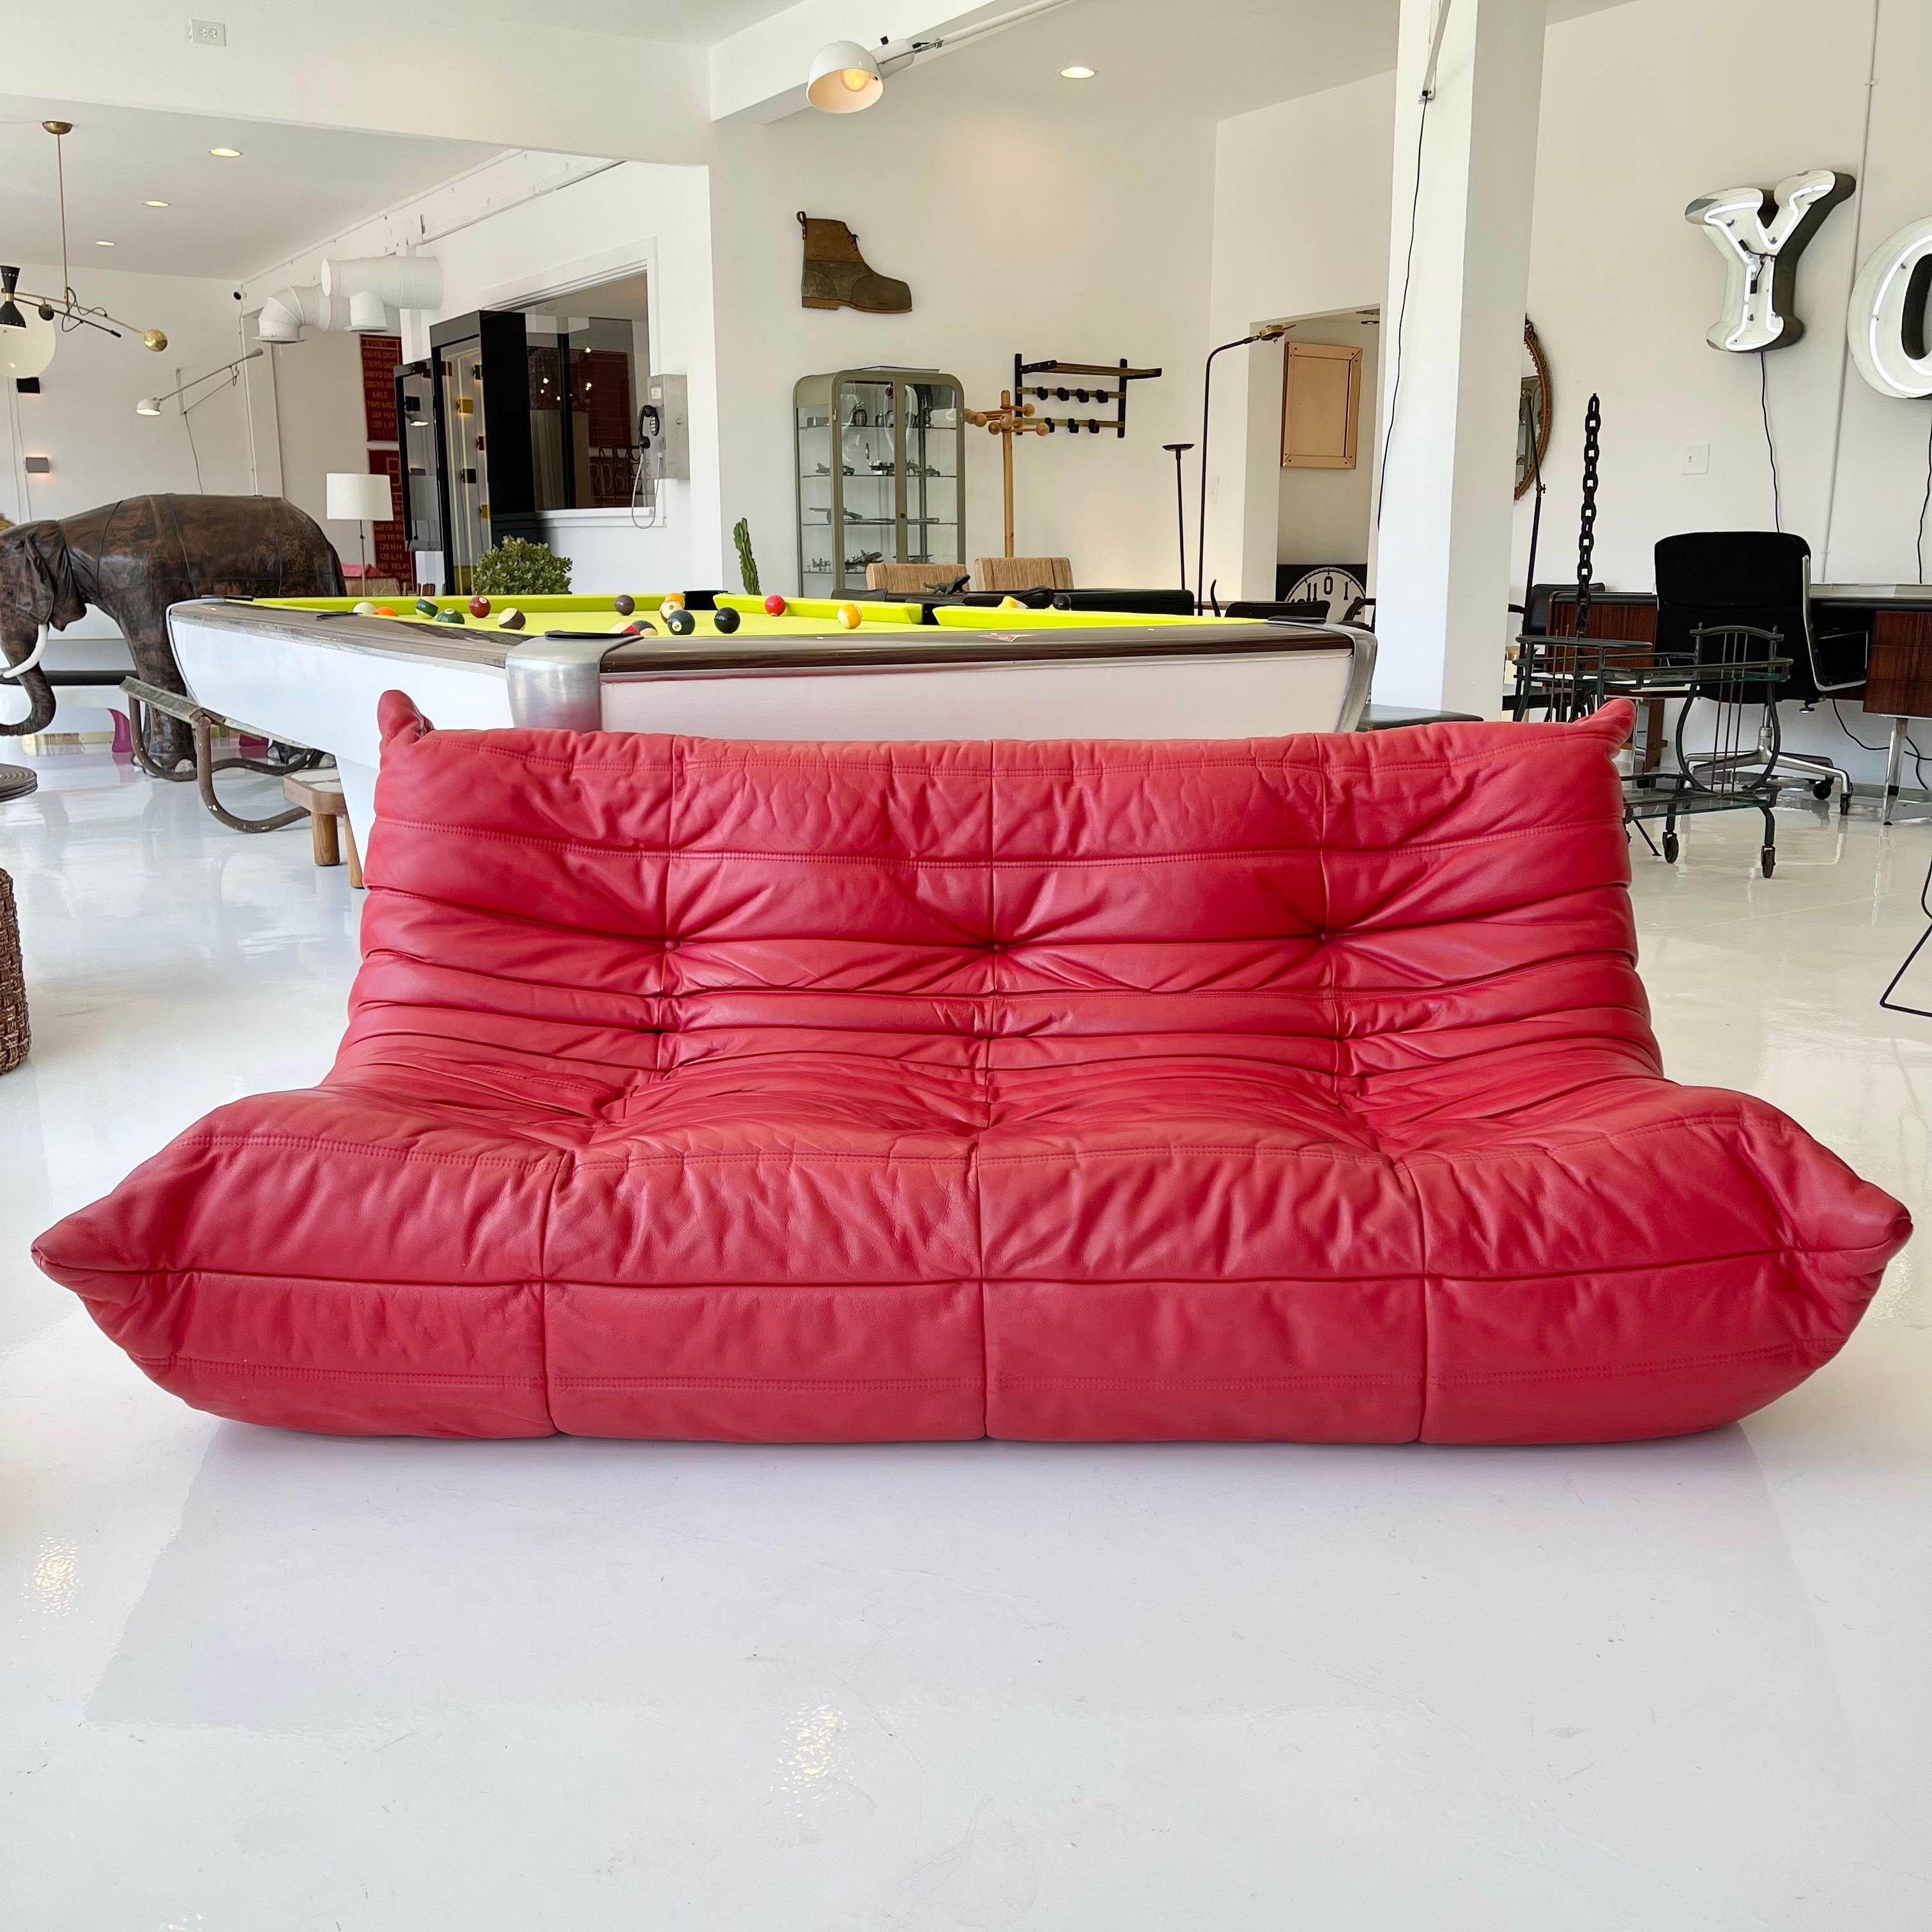 Classic French 3 seater Togo sofa by Michel Ducaroy for luxury brand Ligne Roset. Originally designed in the 1970s the iconic togo sofa is now a design classic. This sofa comes in its original vintage red leather.

Timeless comfort and style make